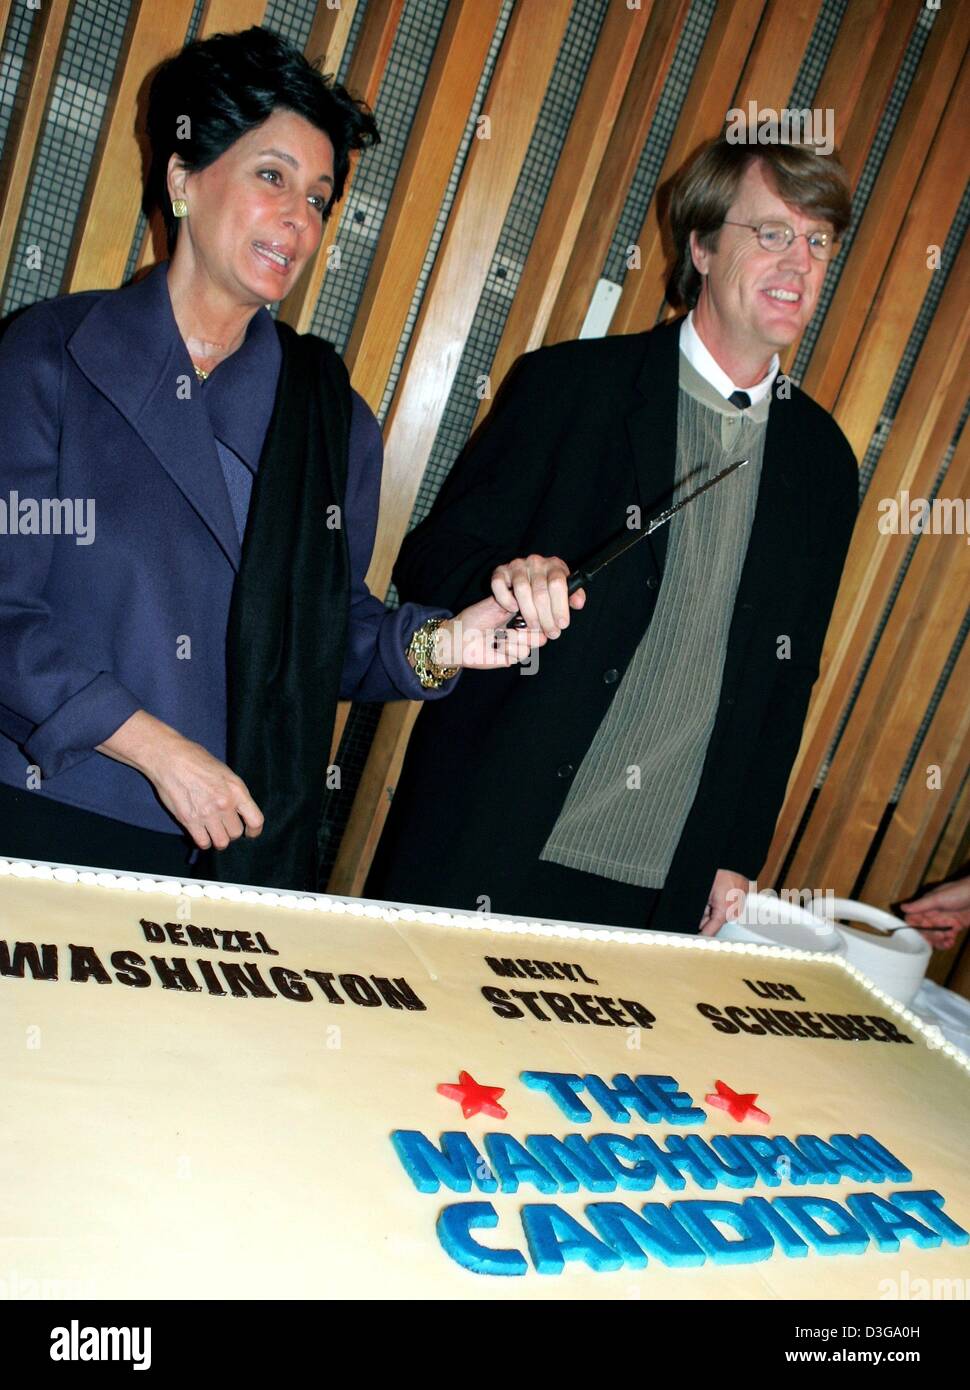 (dpa) - US producer Tina Sinatra, daughter of the legendary singer, and Daniel Pyne, who penned the script for 'Manchurian Candidate', are set to cut a large cake after the end of a special screening of the thriller in Berlin, 20 October 2004. Stock Photo